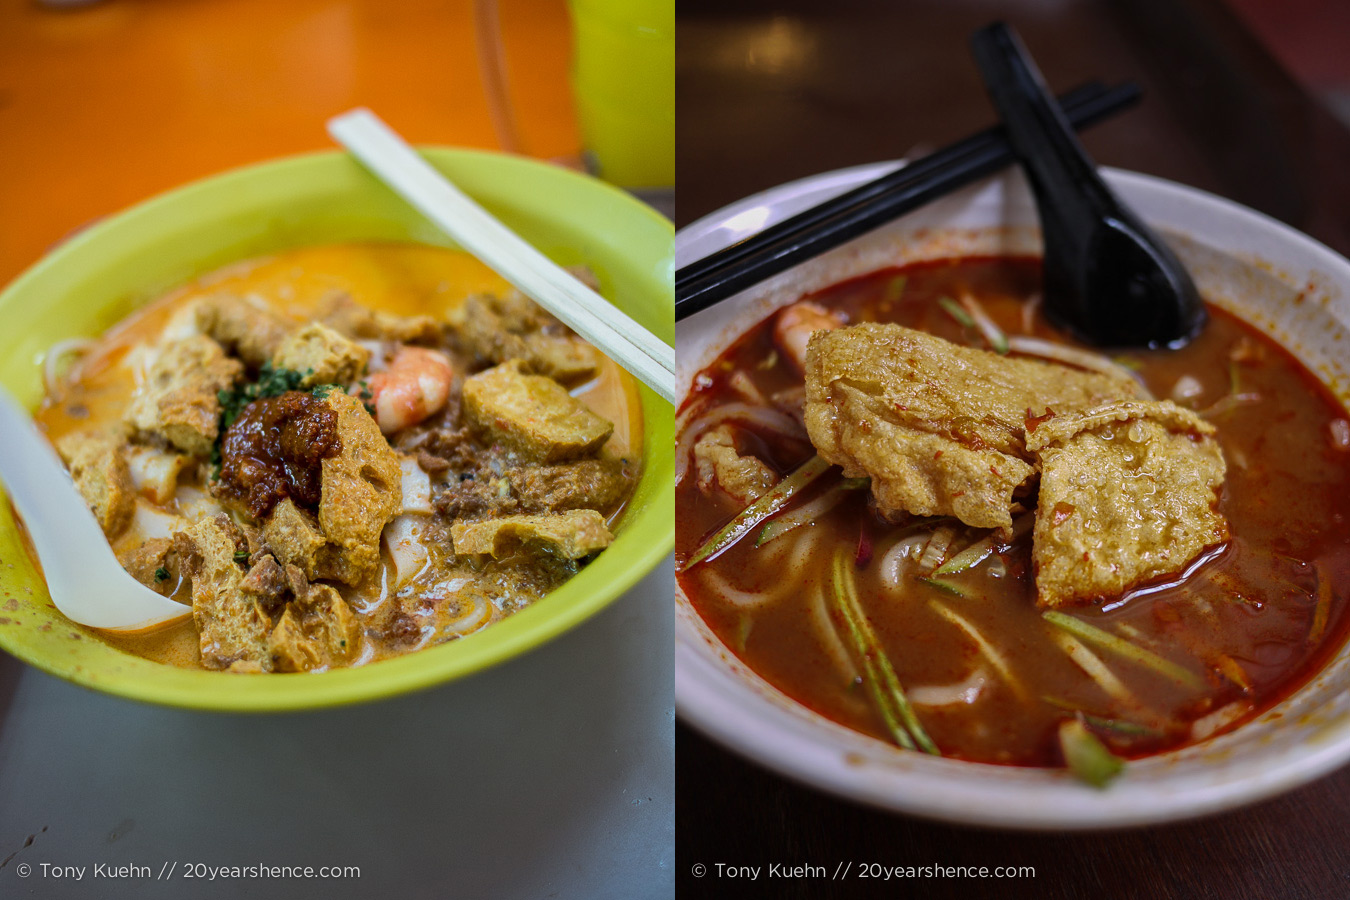  A taste of Malaysia—Baba laksa on the left, asam laksa on the right